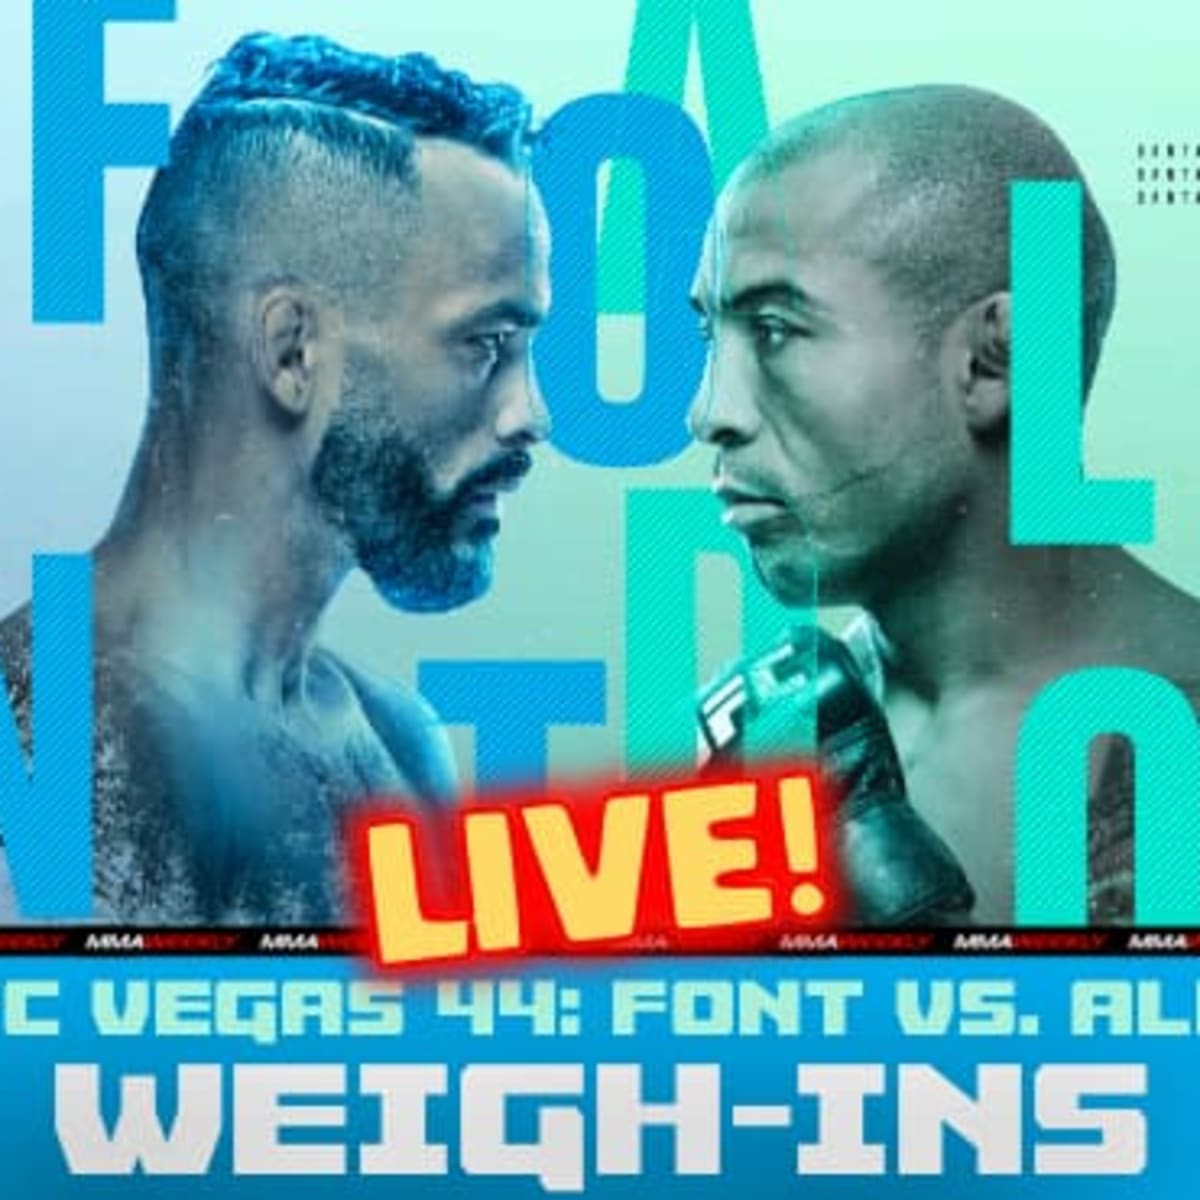 UFC Vegas 44 Live Weigh-in Results and Video Stream